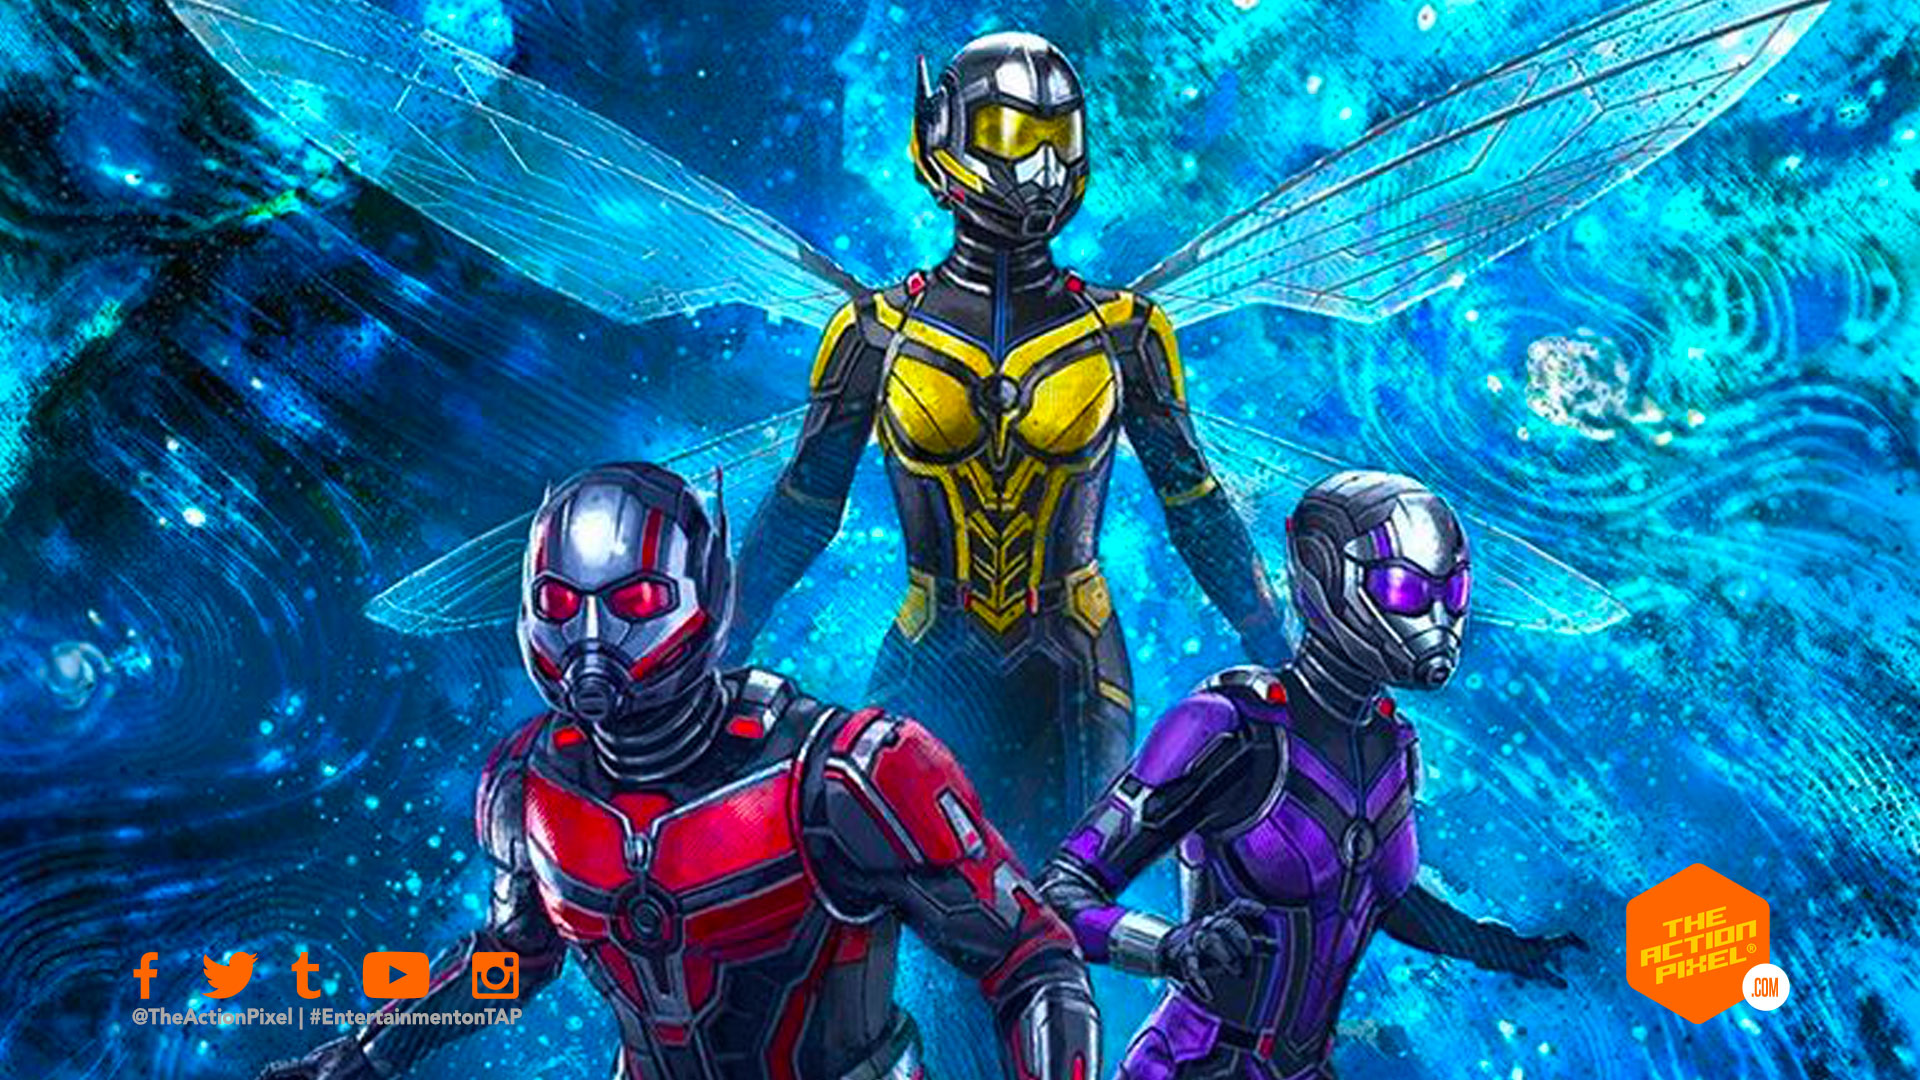 kang, antman, wasp, quantumania, ant-man and the wasp: quantumania, entertainment on tap, the action pixel, featured